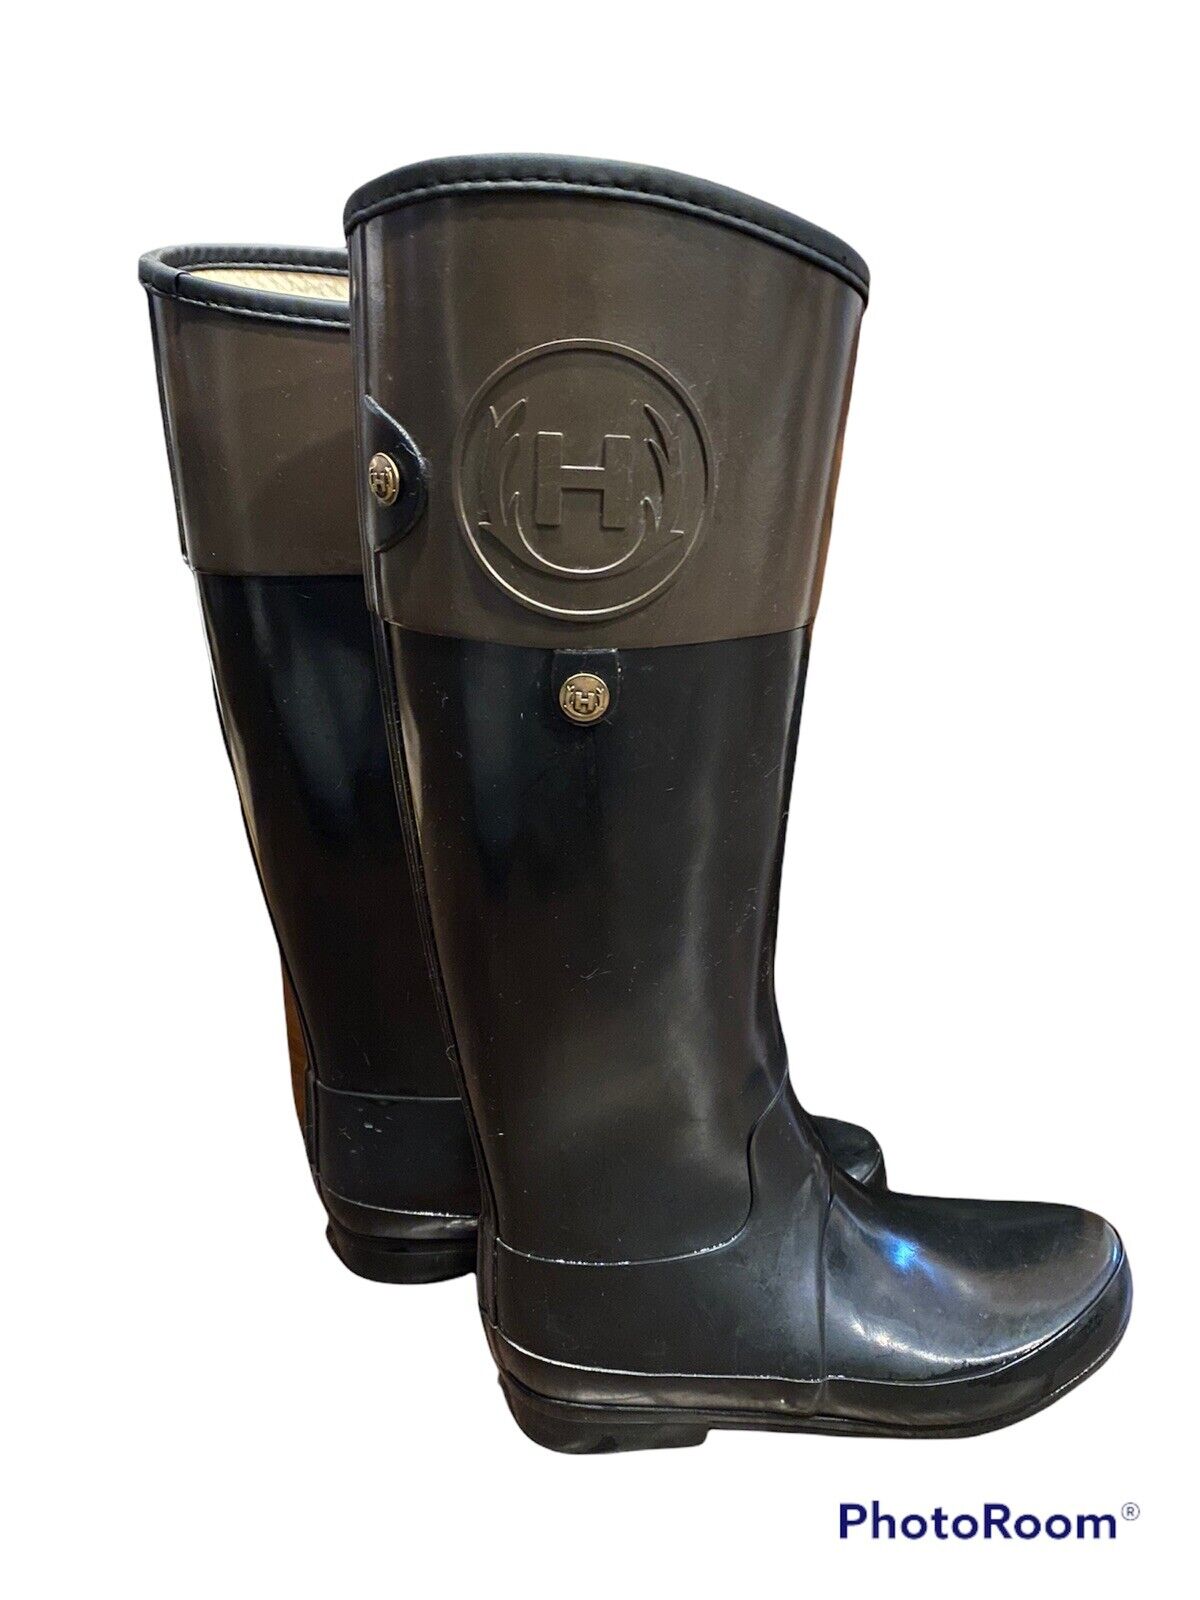 spray cup Pull out Hunter Regent Carlyle Black/Brown Two Tone Shiny Rubber Riding Rain Boots  Sz 7 | eBay